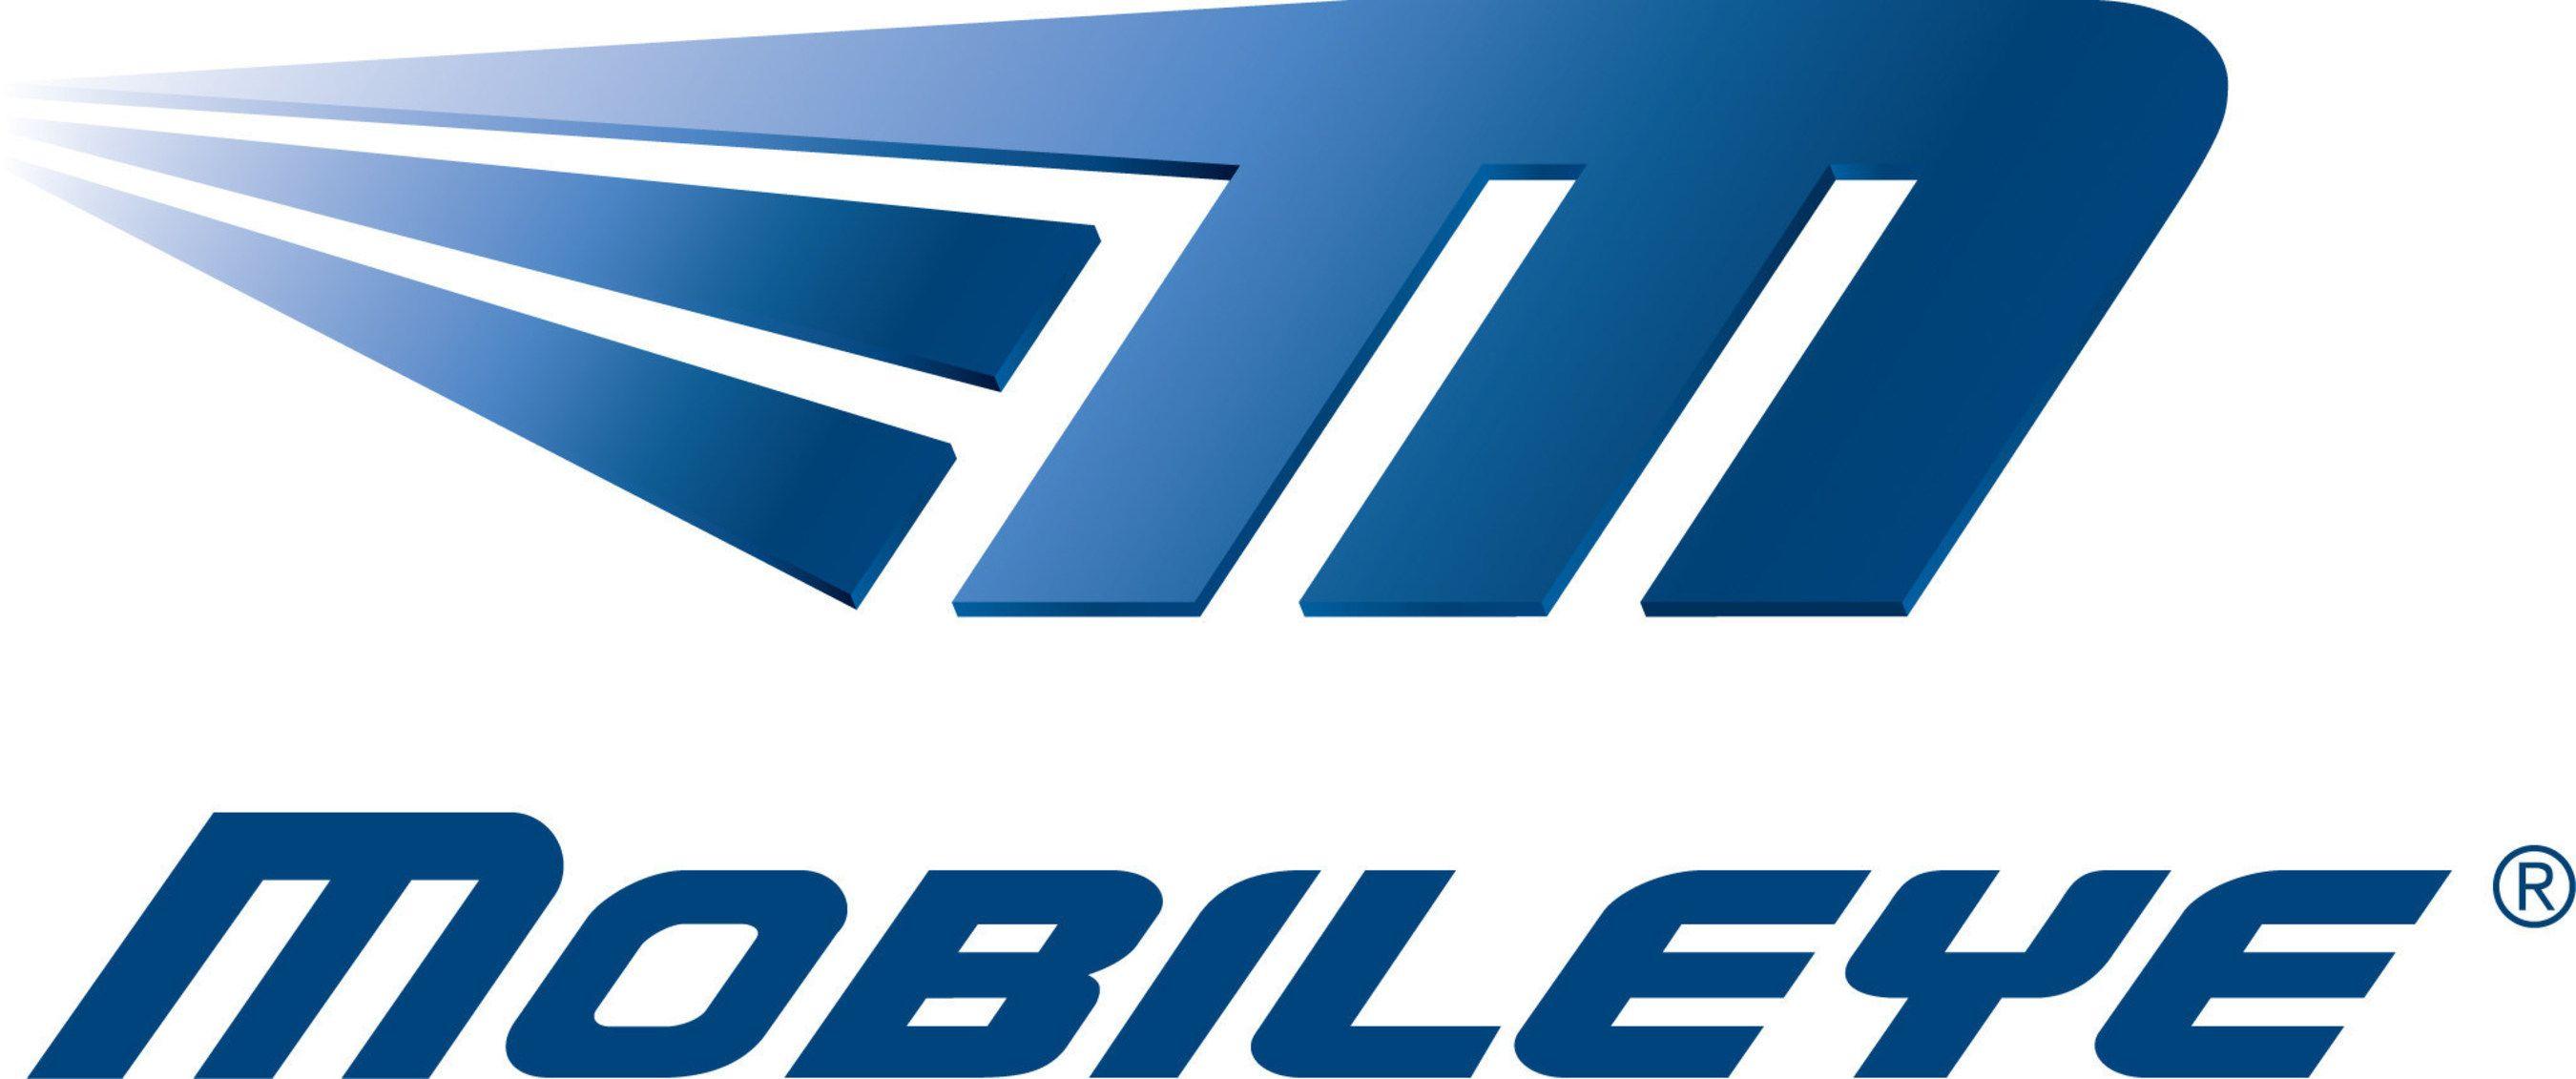 Mobileye Logo - Mobileye Announces Publication of Notice of Annual General Meeting